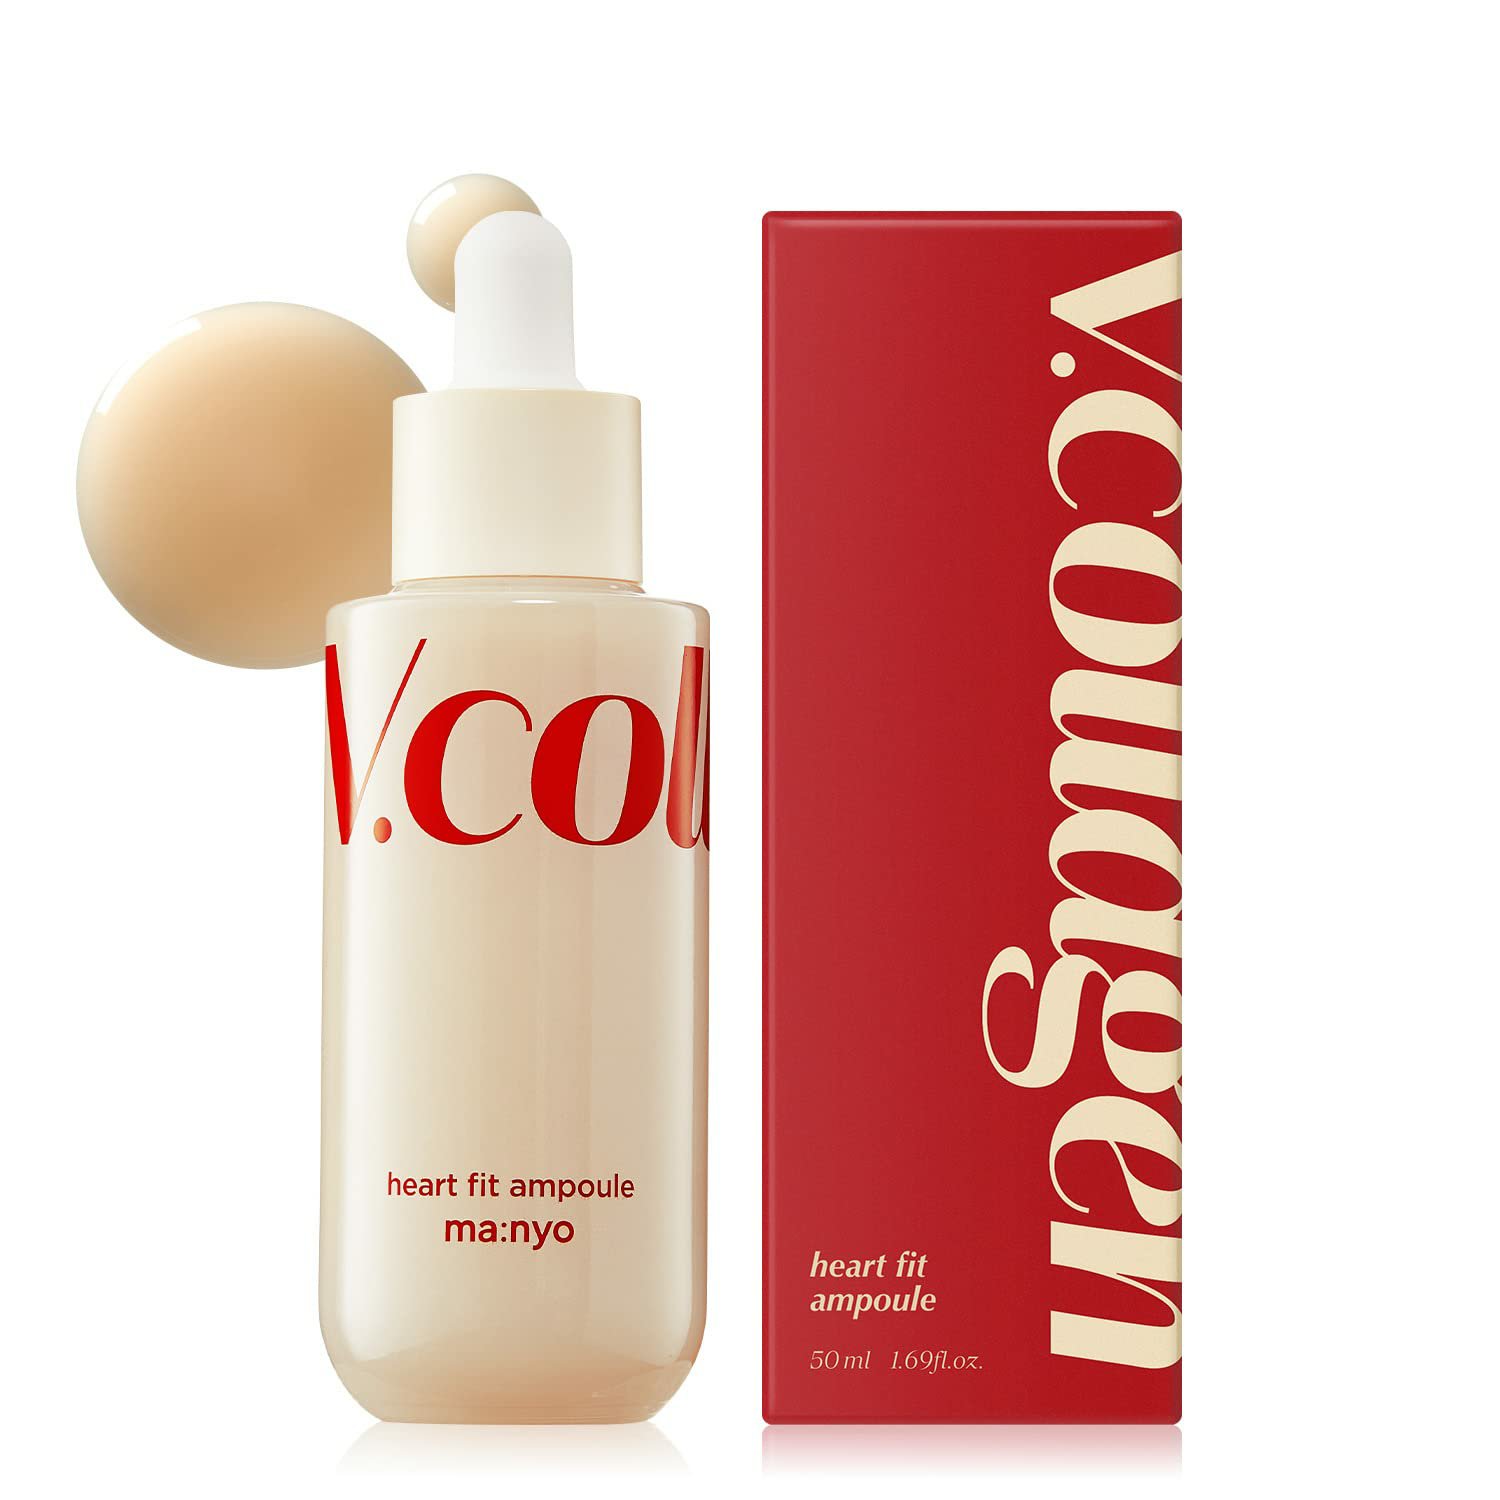 Tinh Chất Ma:nyo V.collagen Heart Fit Ampoule 50ml (NK)